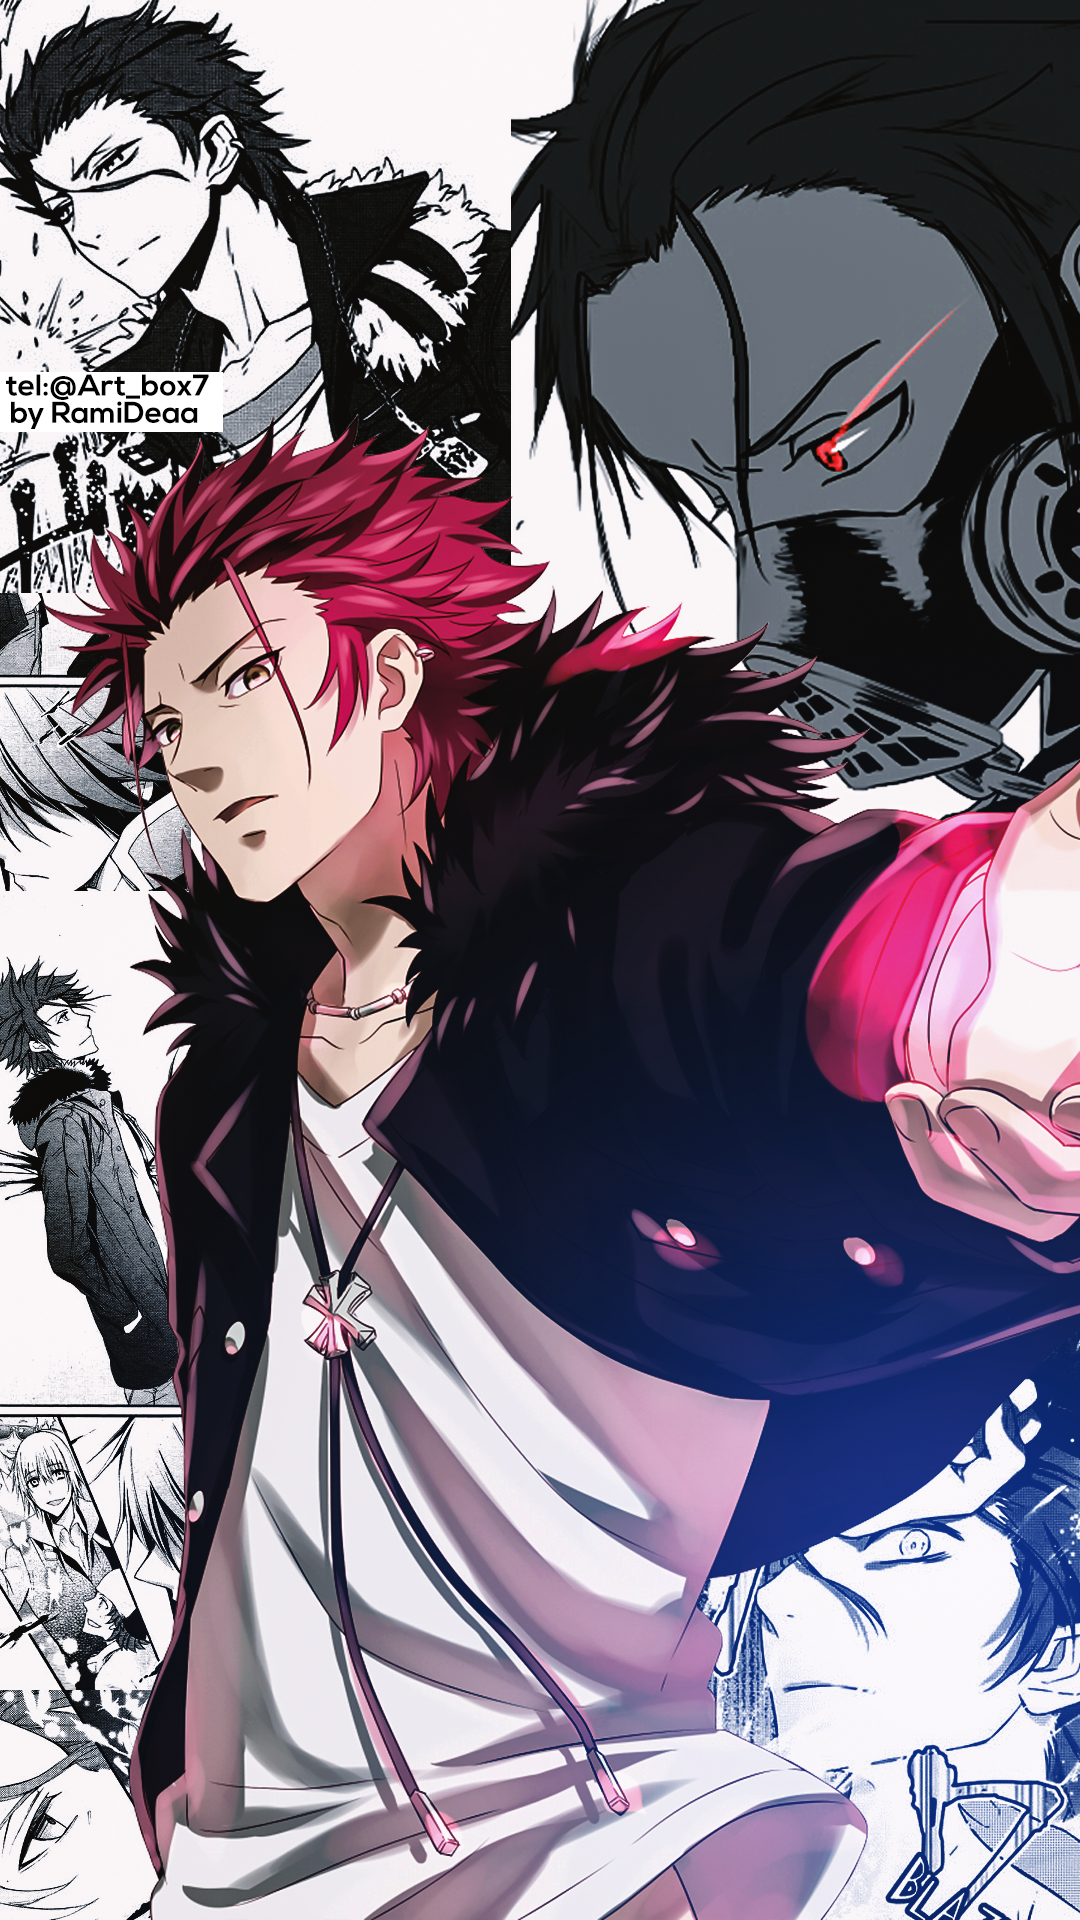 Mikoto Suoh ideas. k project anime, k project, suoh mikoto